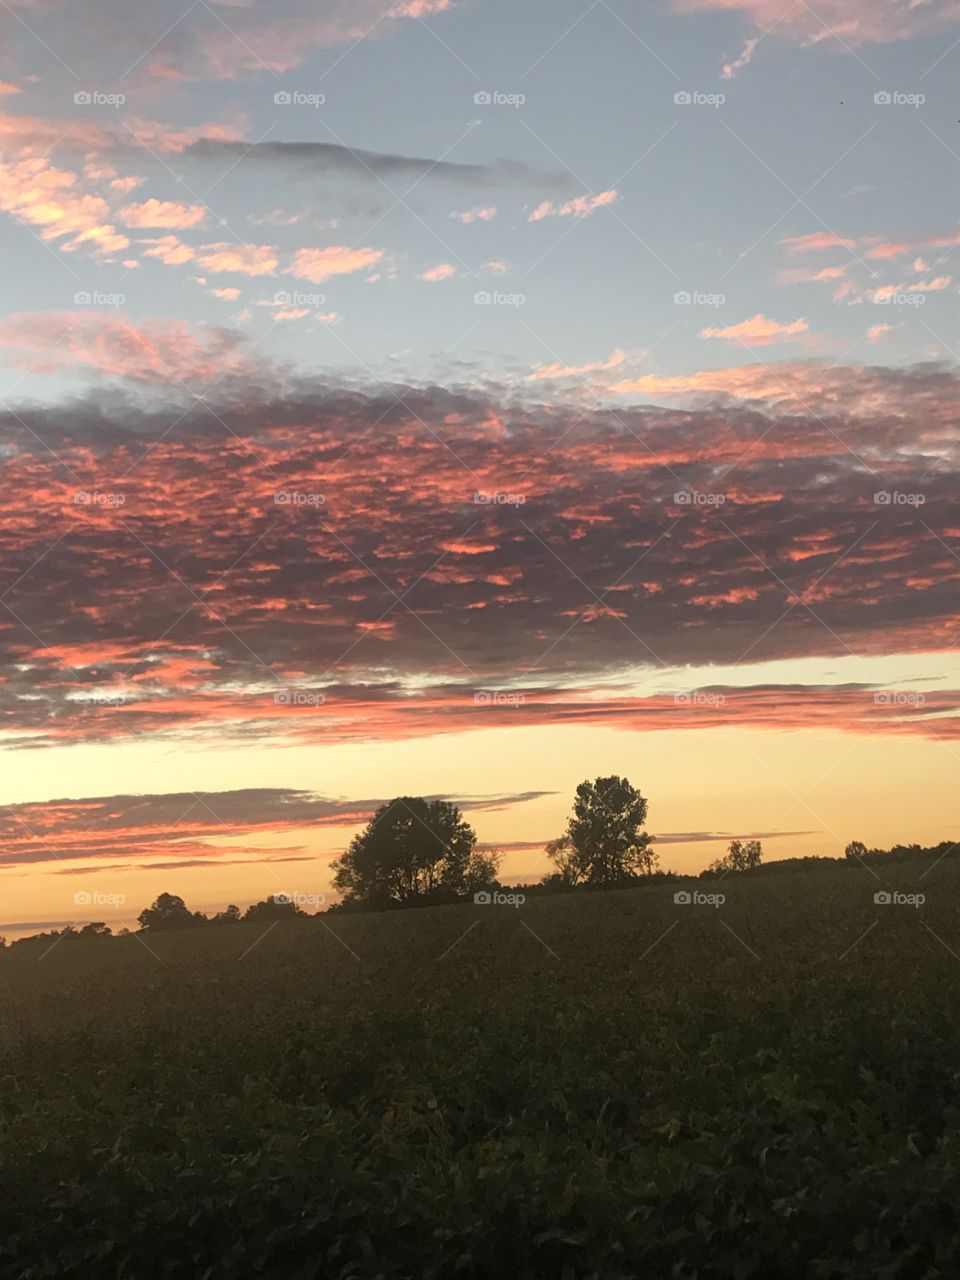 The Bluegrass sunsets or orange, pinks and yellows make driving home much more beautiful 